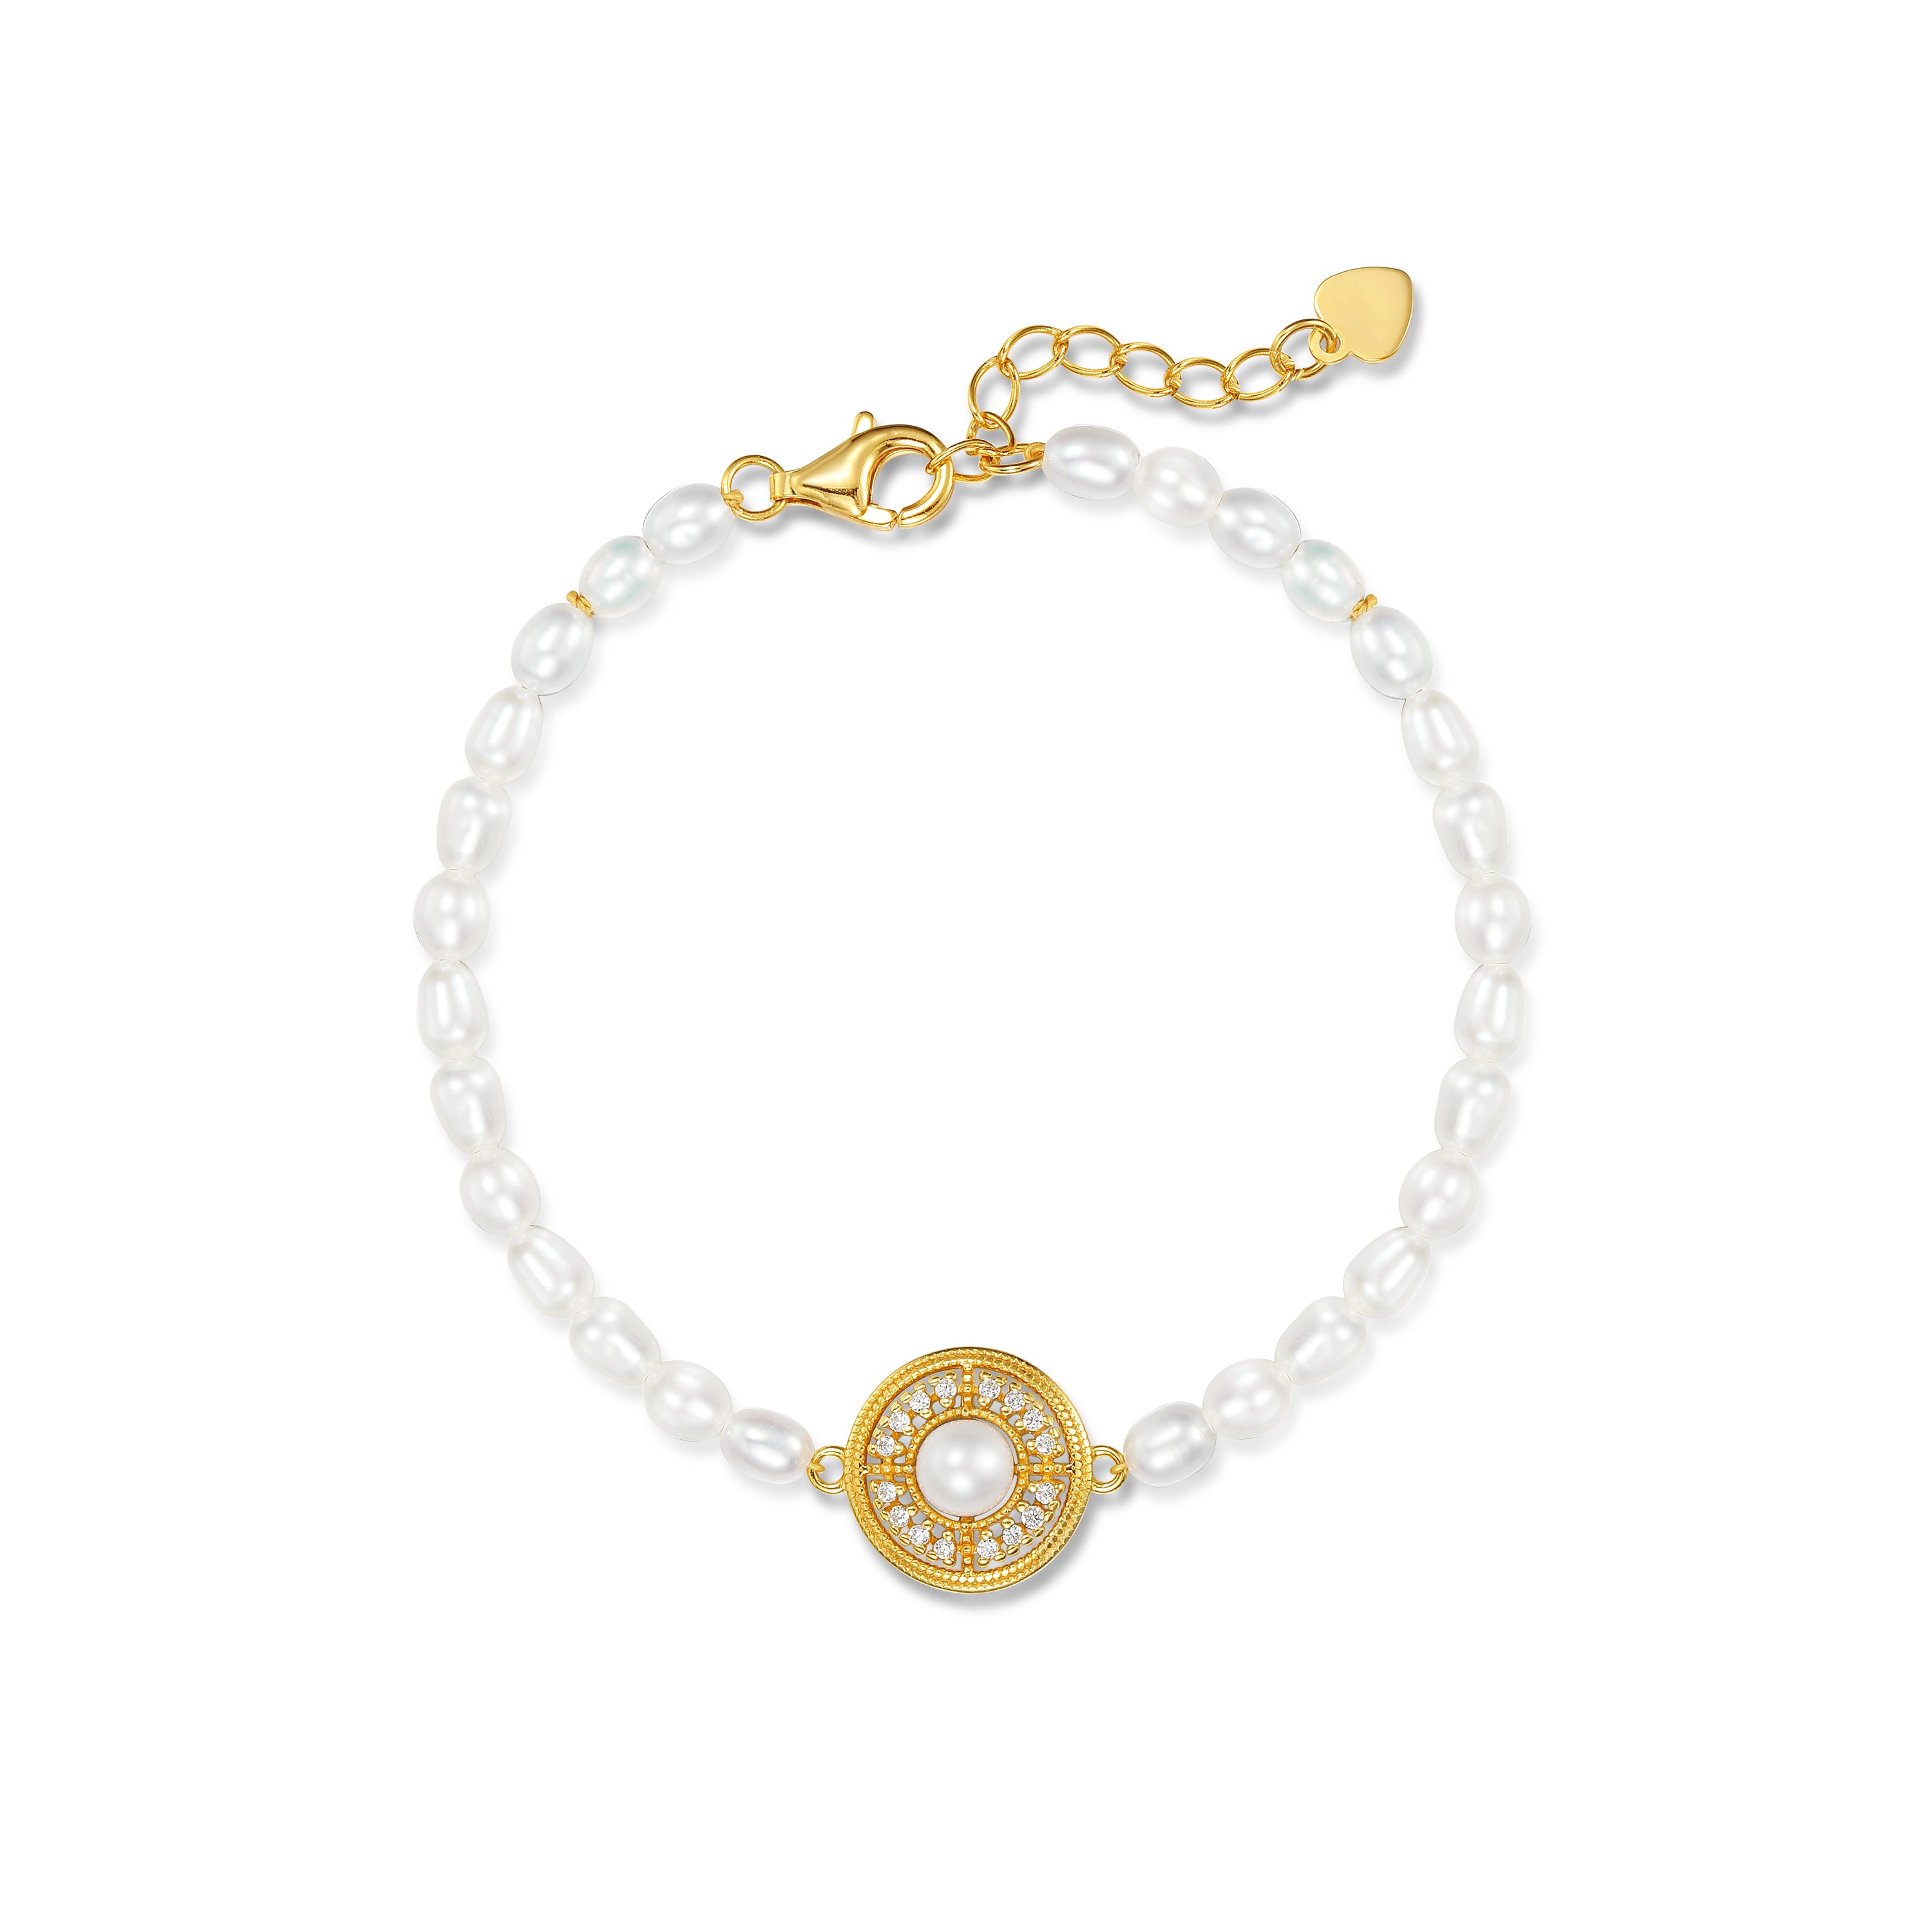 Golden Halo Freshwater Pearl Bracelet - L'Amour Pearls